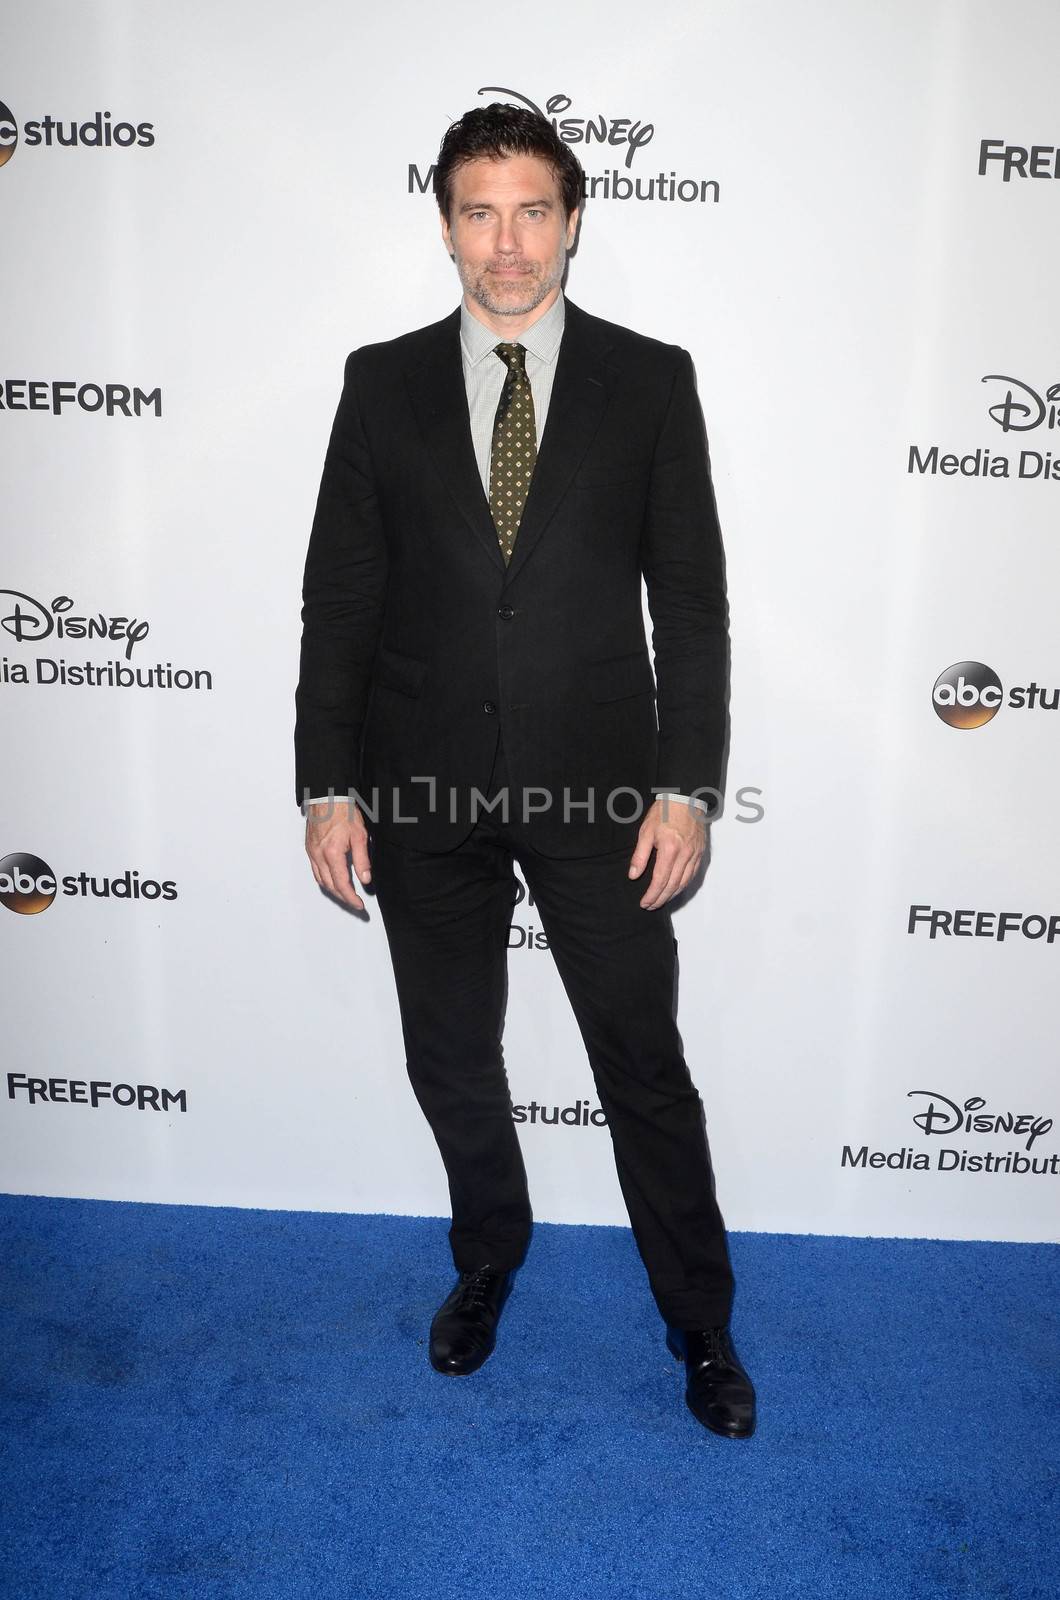 Anson Mount
at the 2017 ABC International Upfronts, Disney Studios, Burbank, CA 05-21-17/ImageCollect by ImageCollect